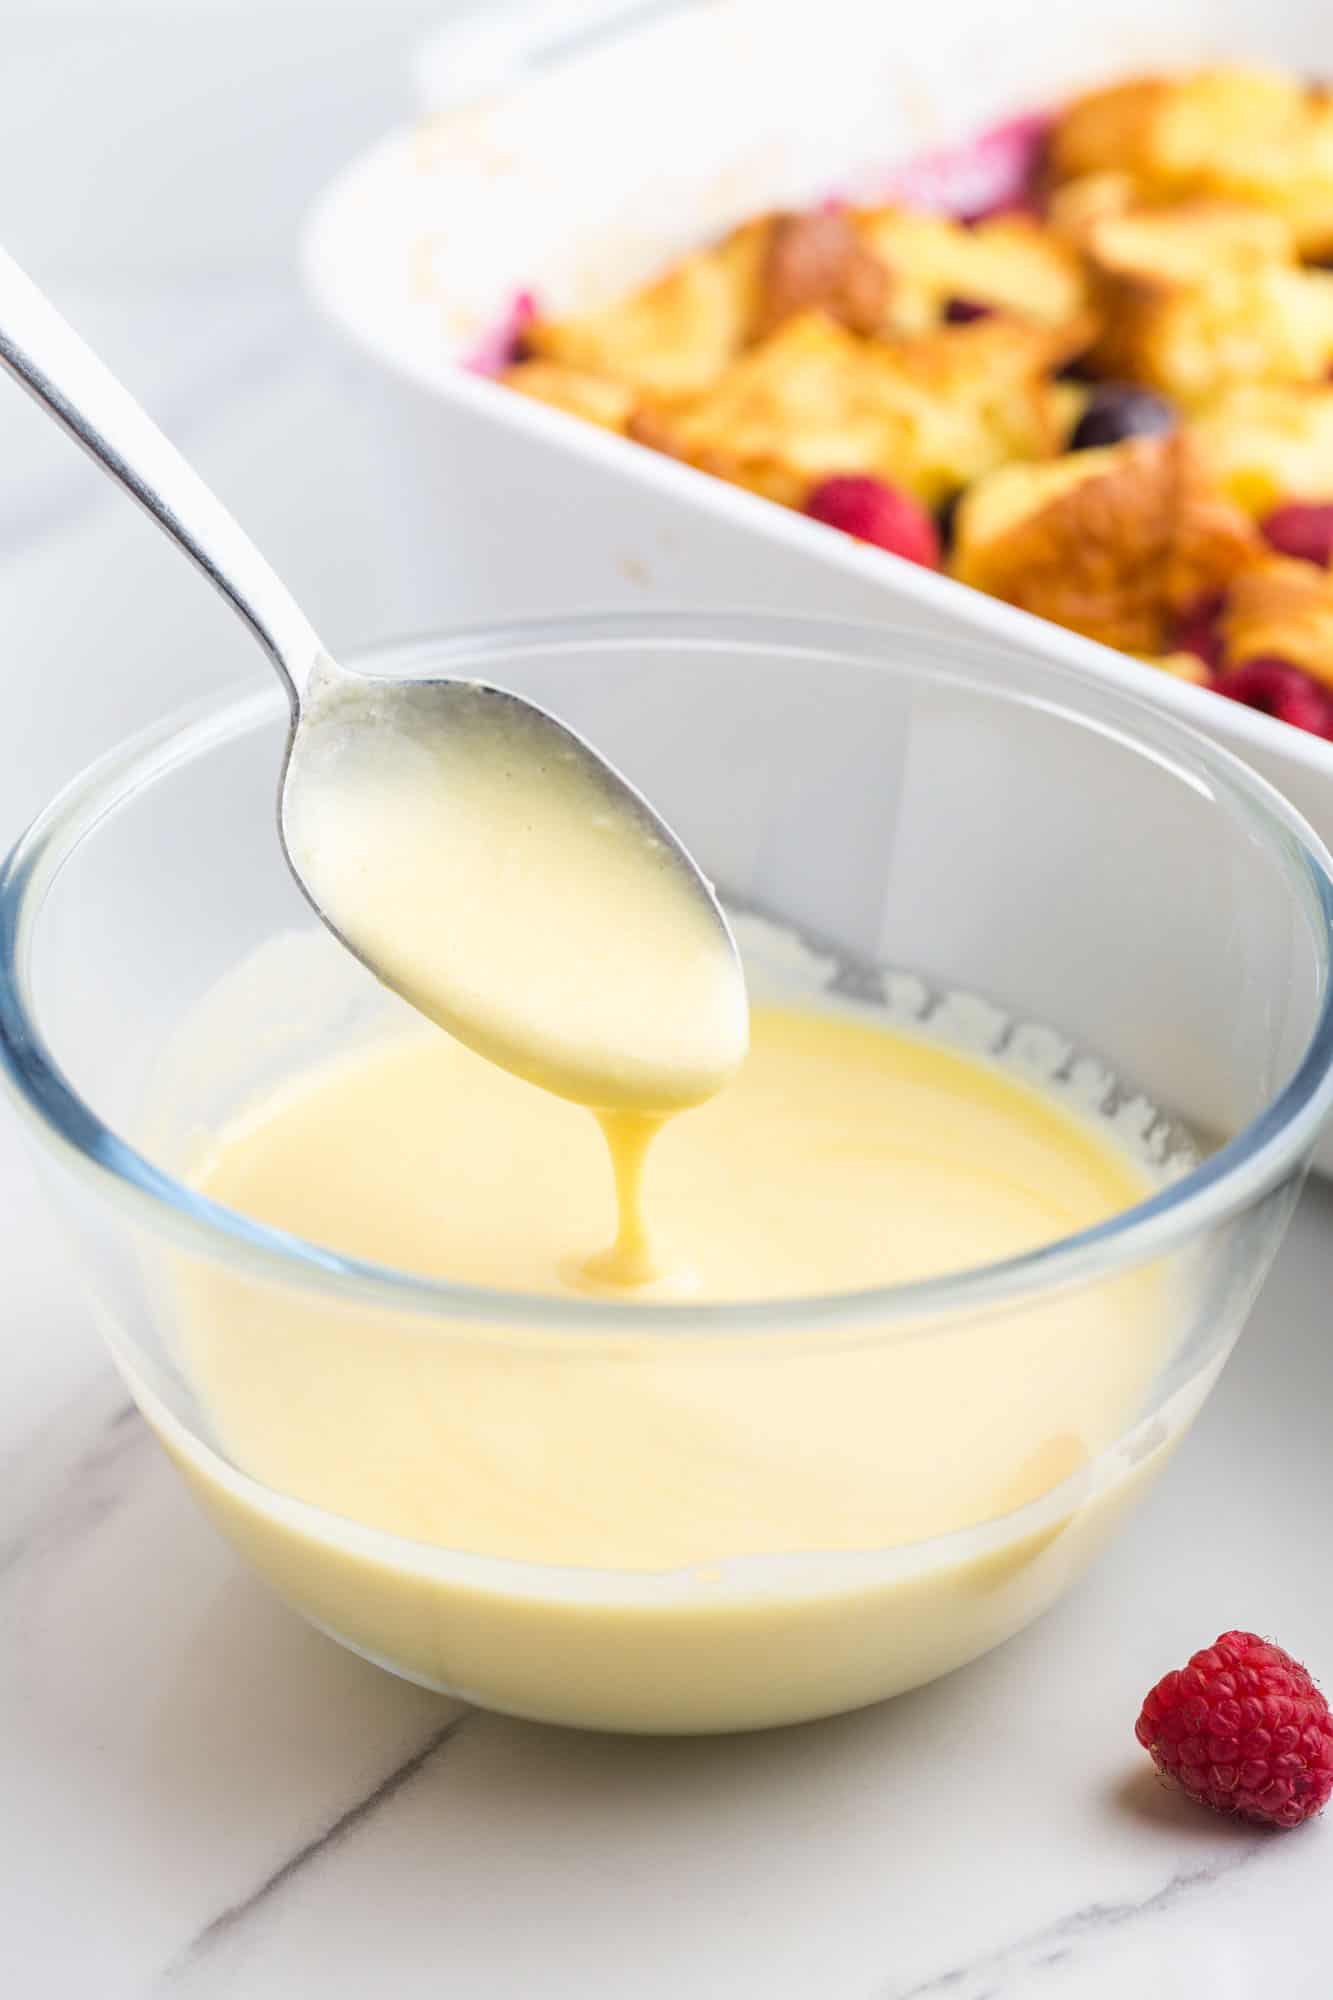 Simple vanilla sauce in a small glass bowl, and a spoon.